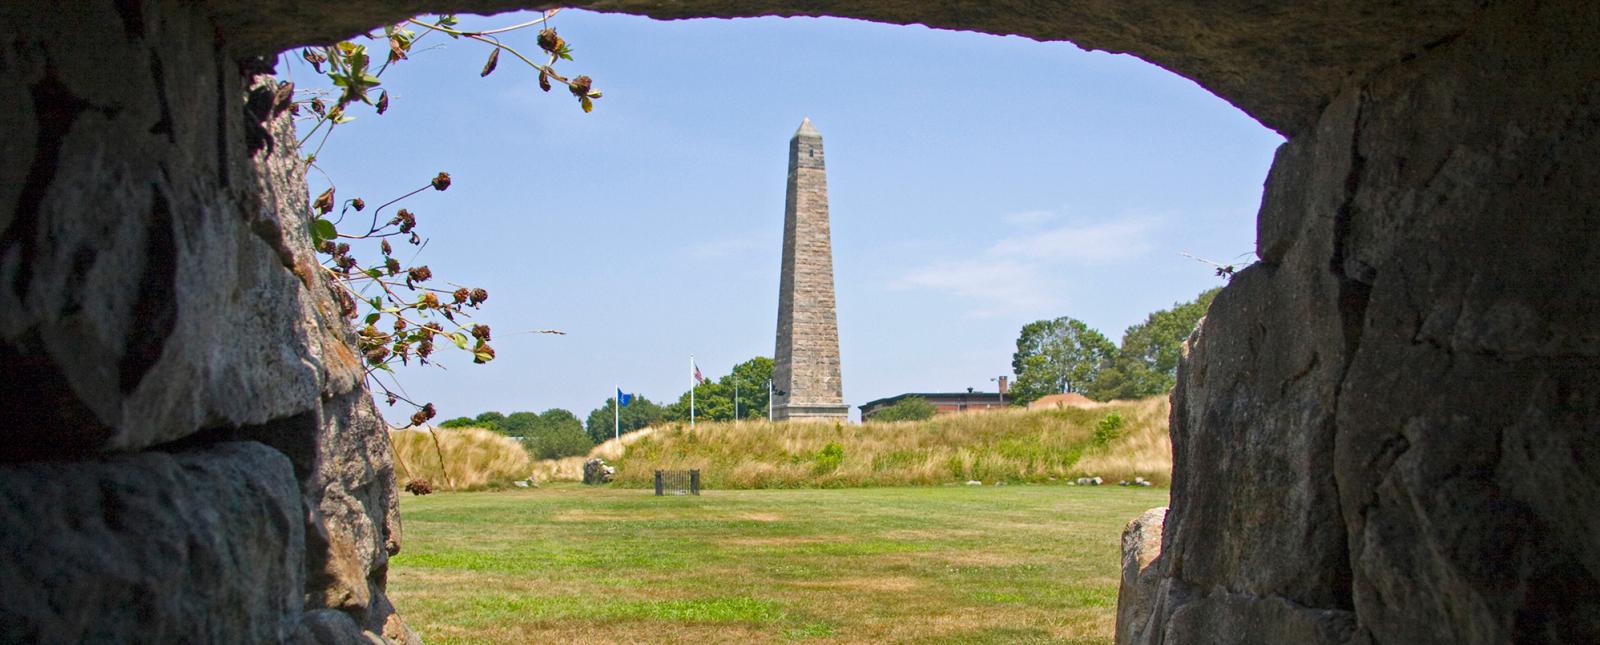 View of monument at Fort Griswold